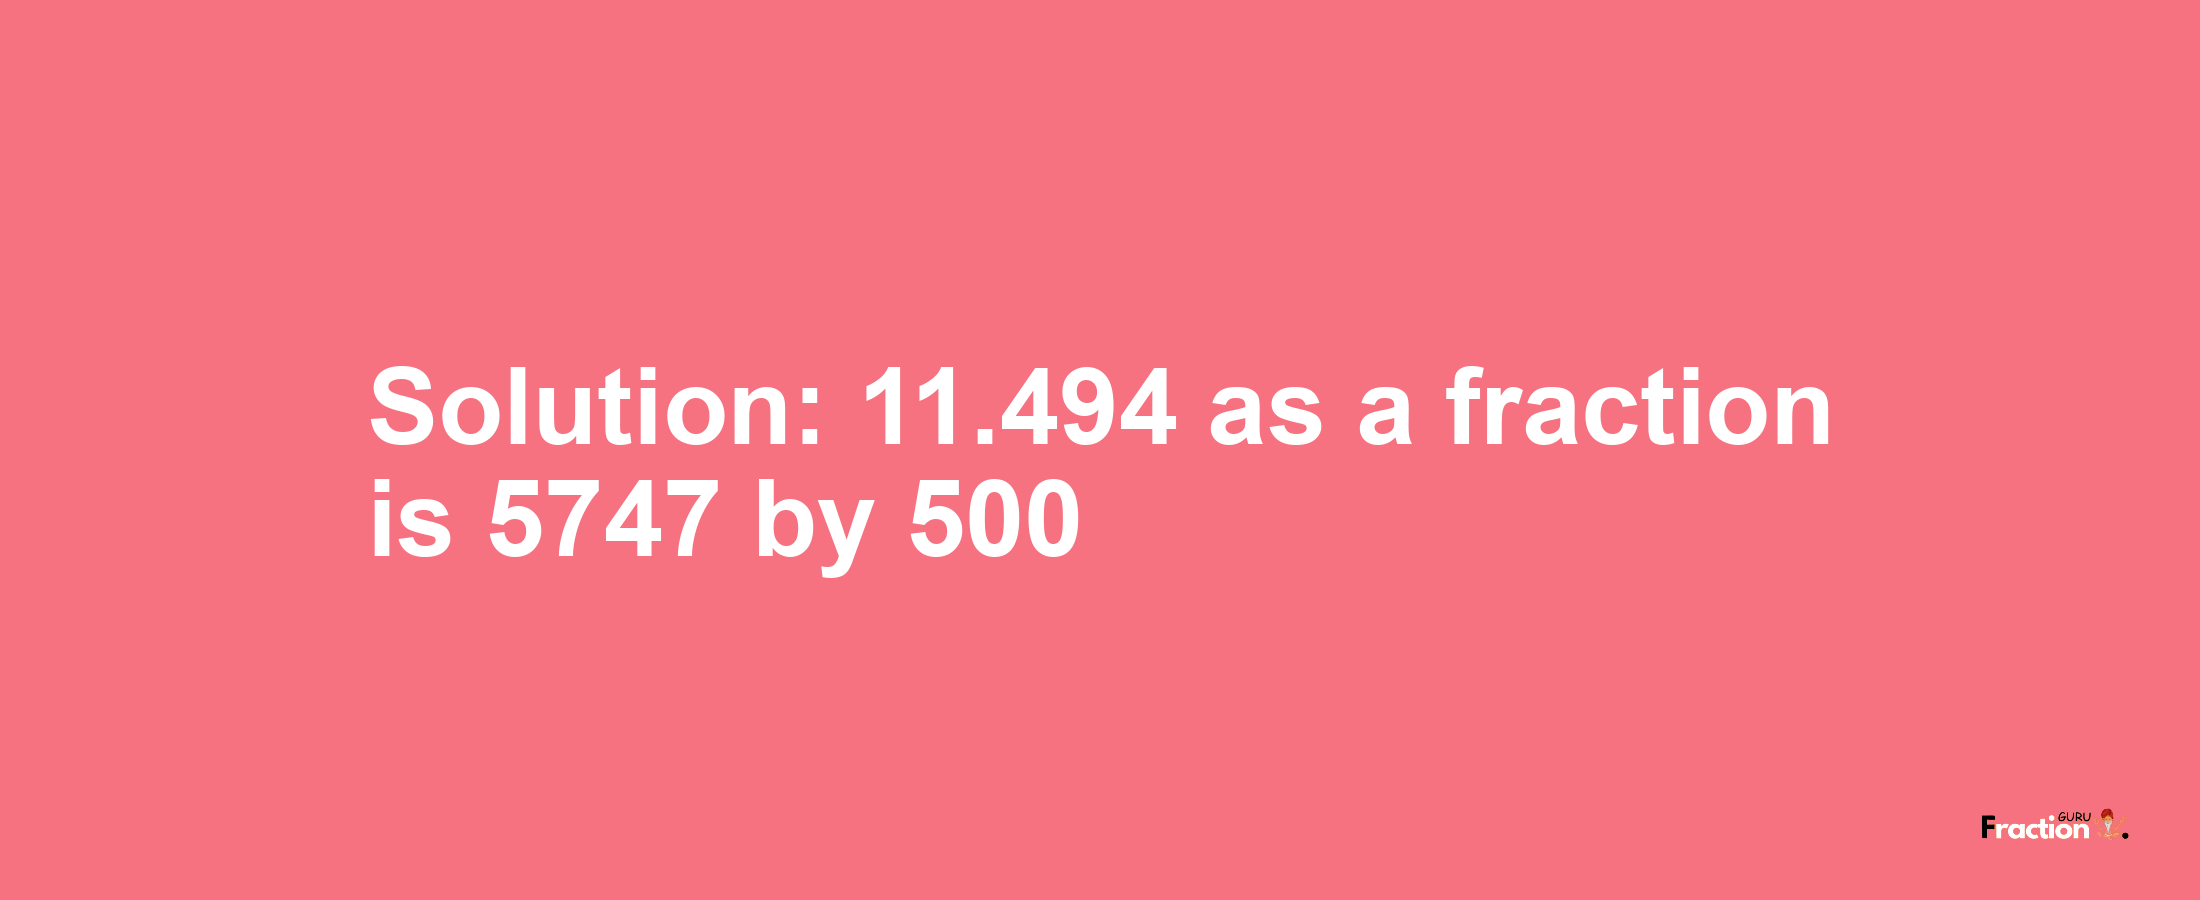 Solution:11.494 as a fraction is 5747/500